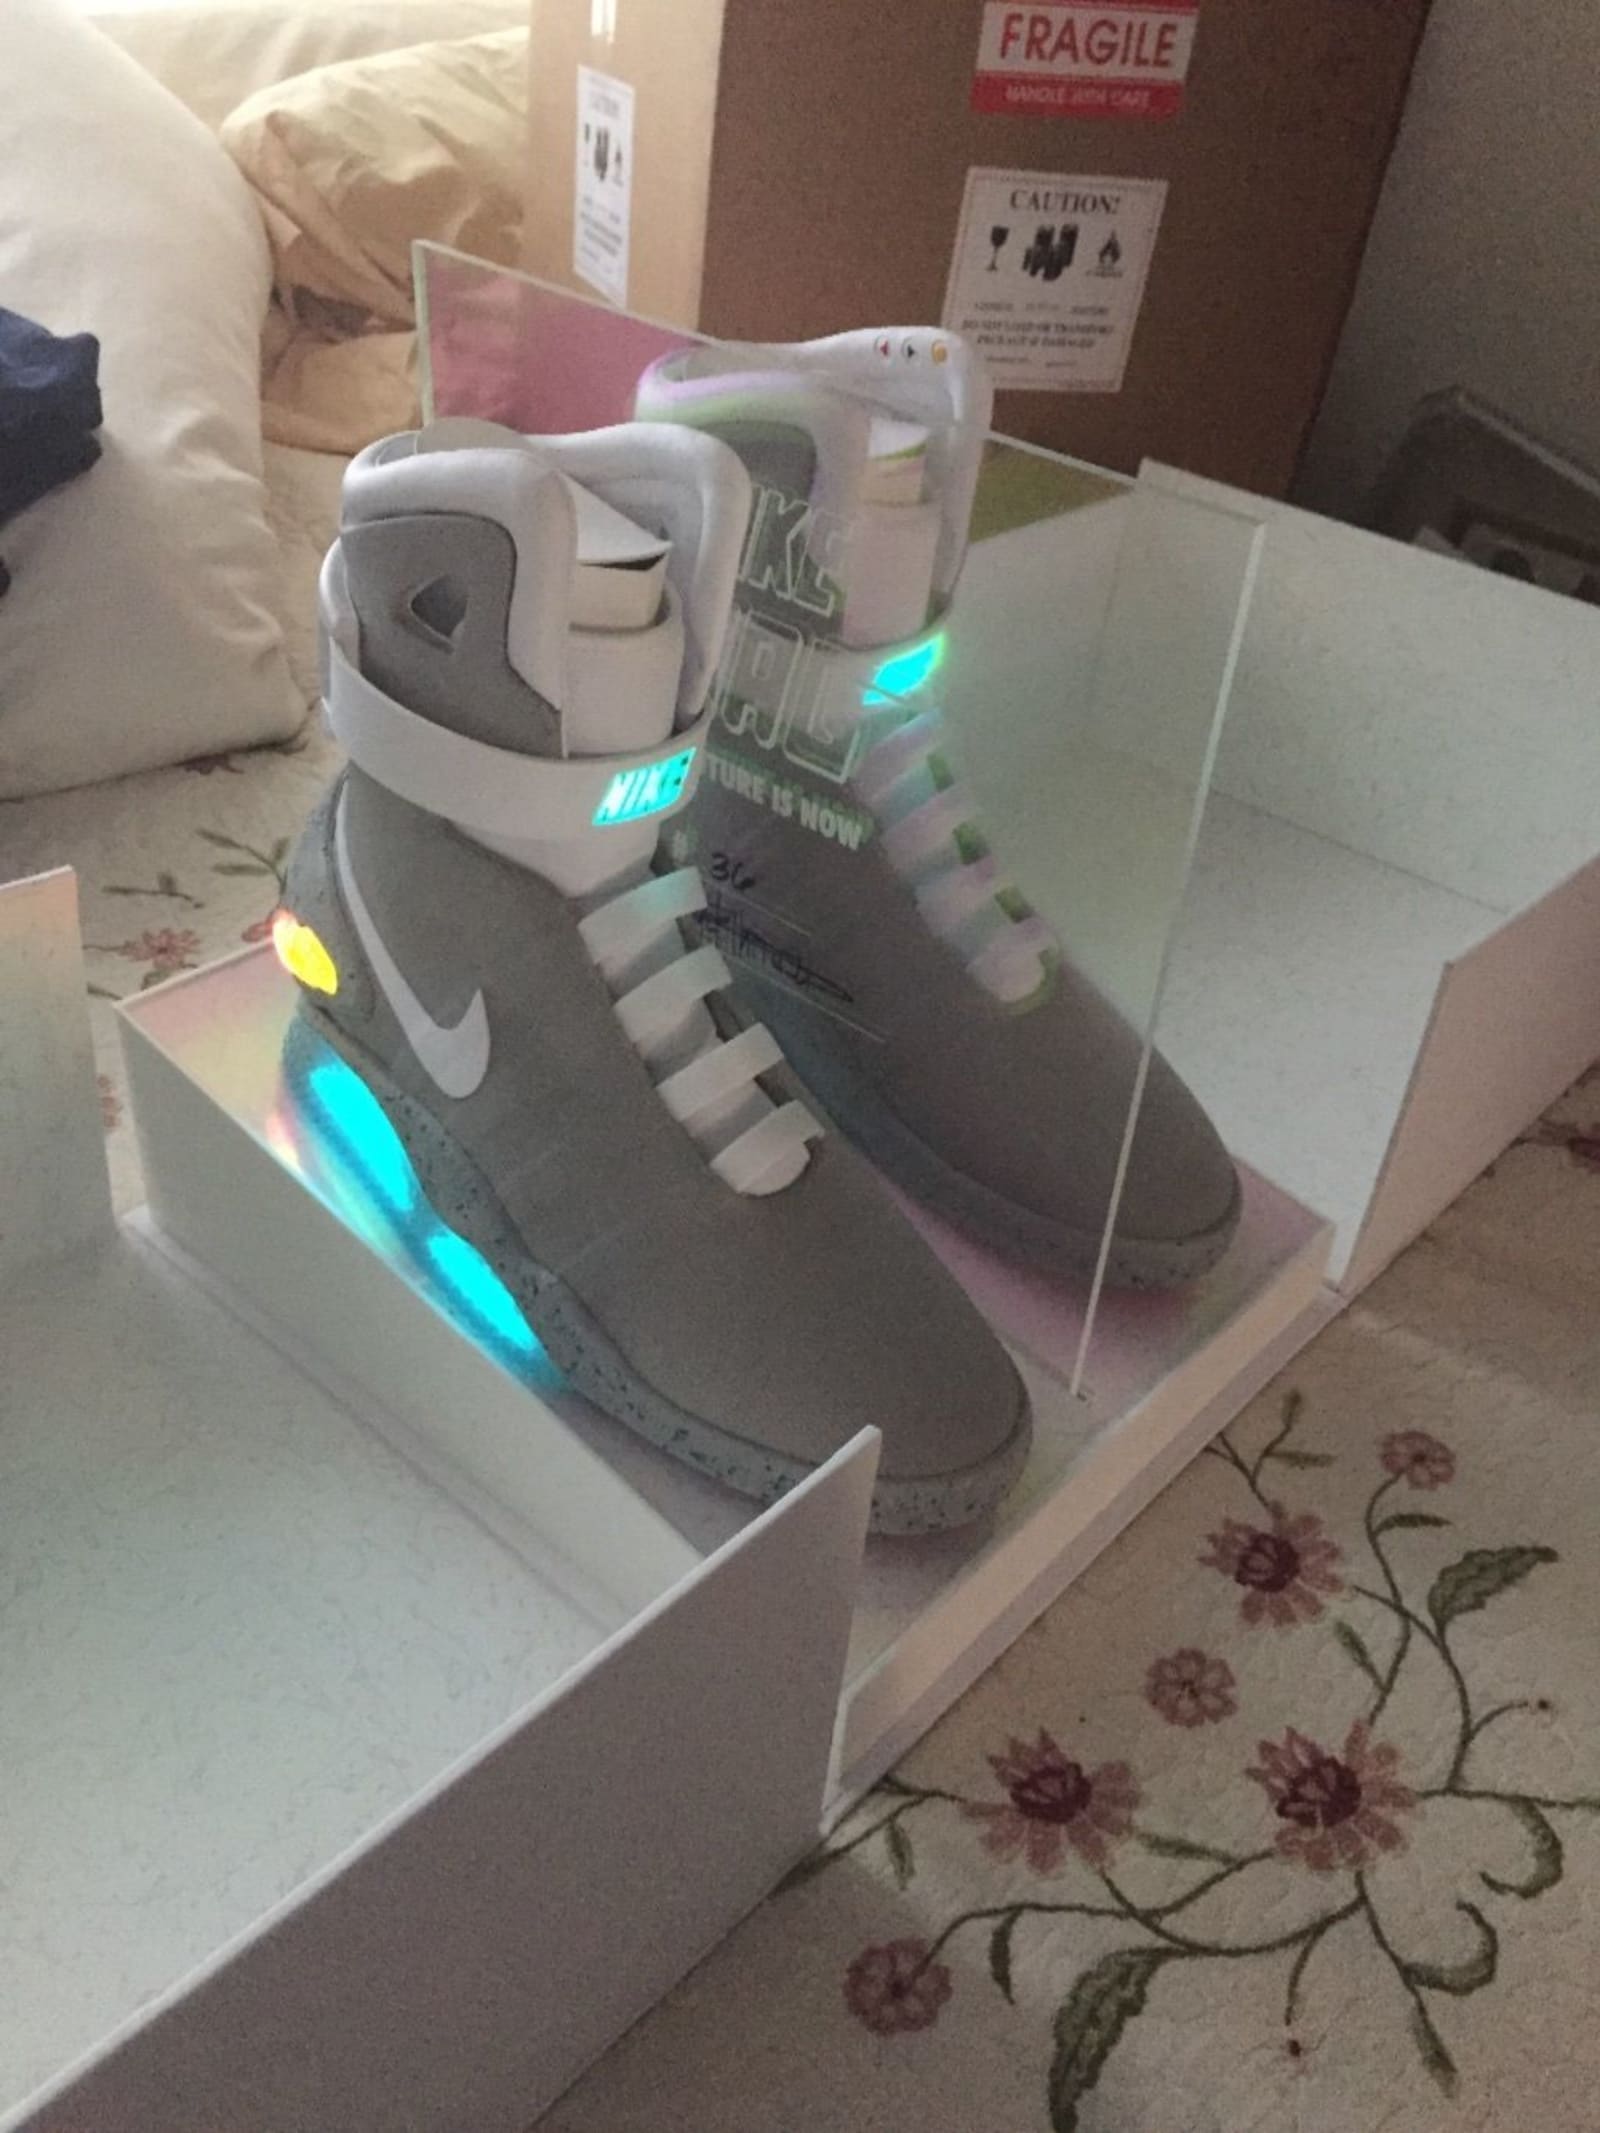 nike air mag auto lace price